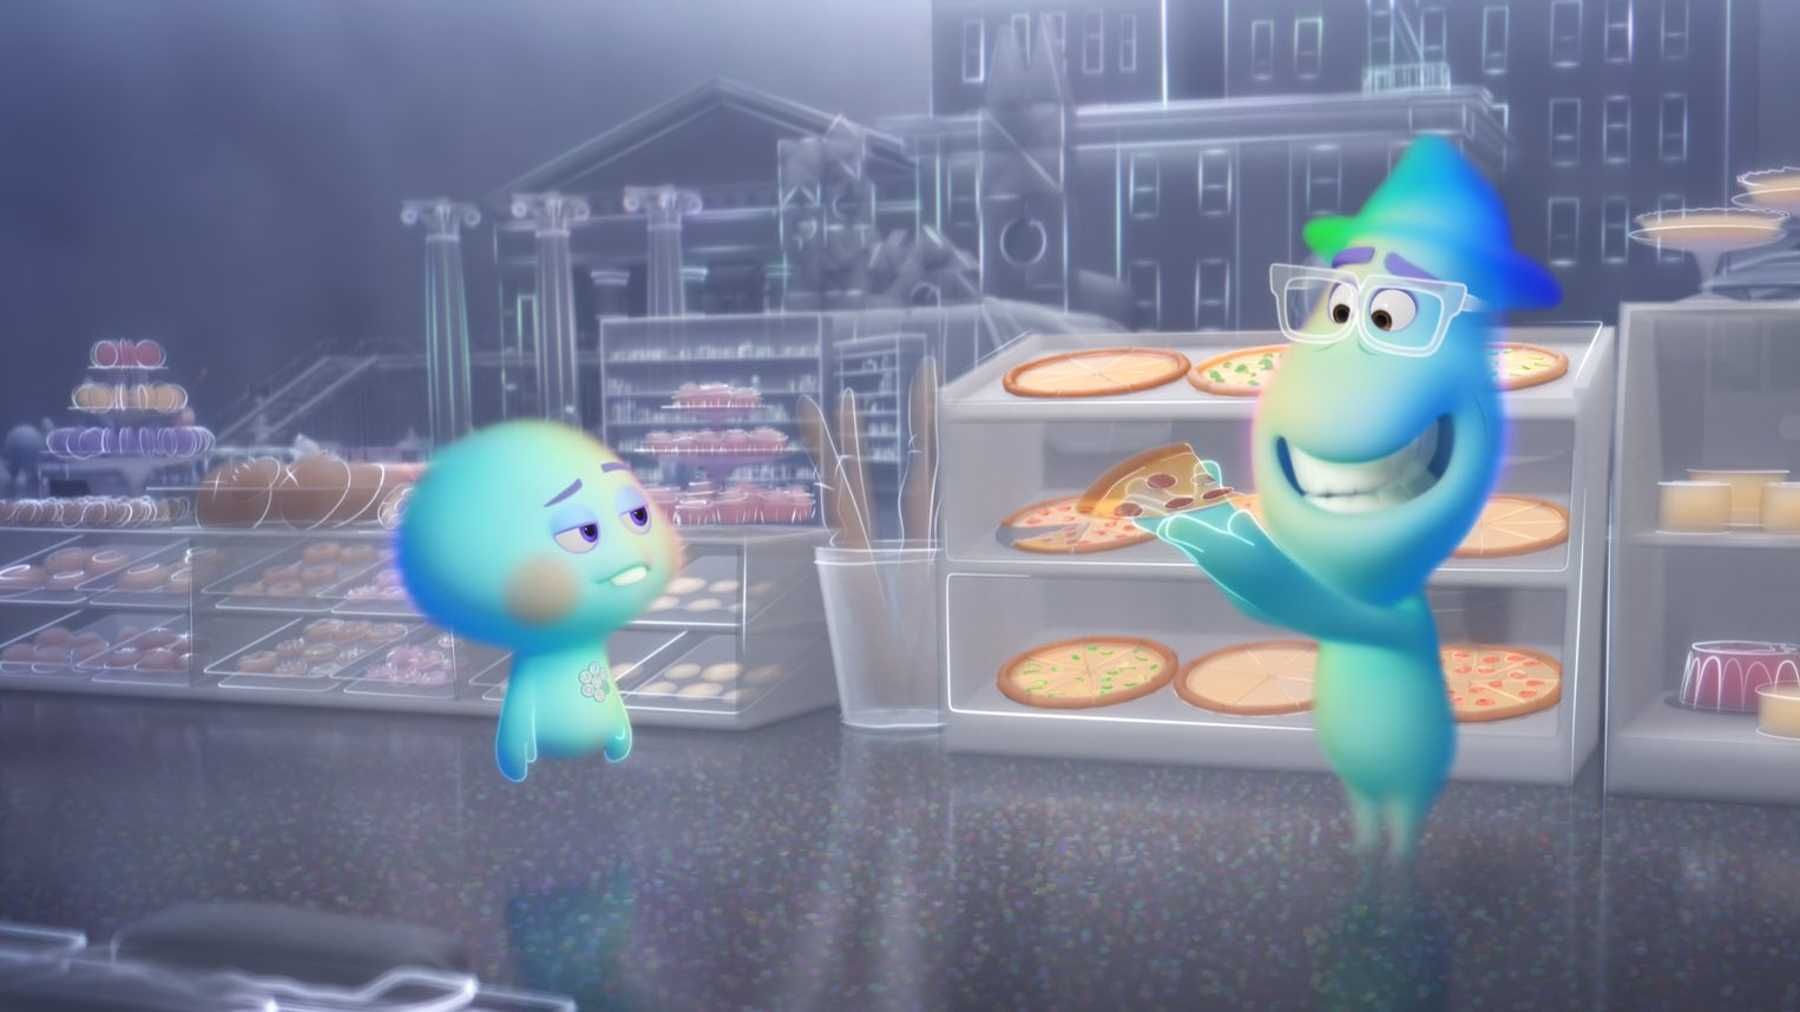 REVIEW: Pixar’s Soul does for adults what Inside Out did for kids